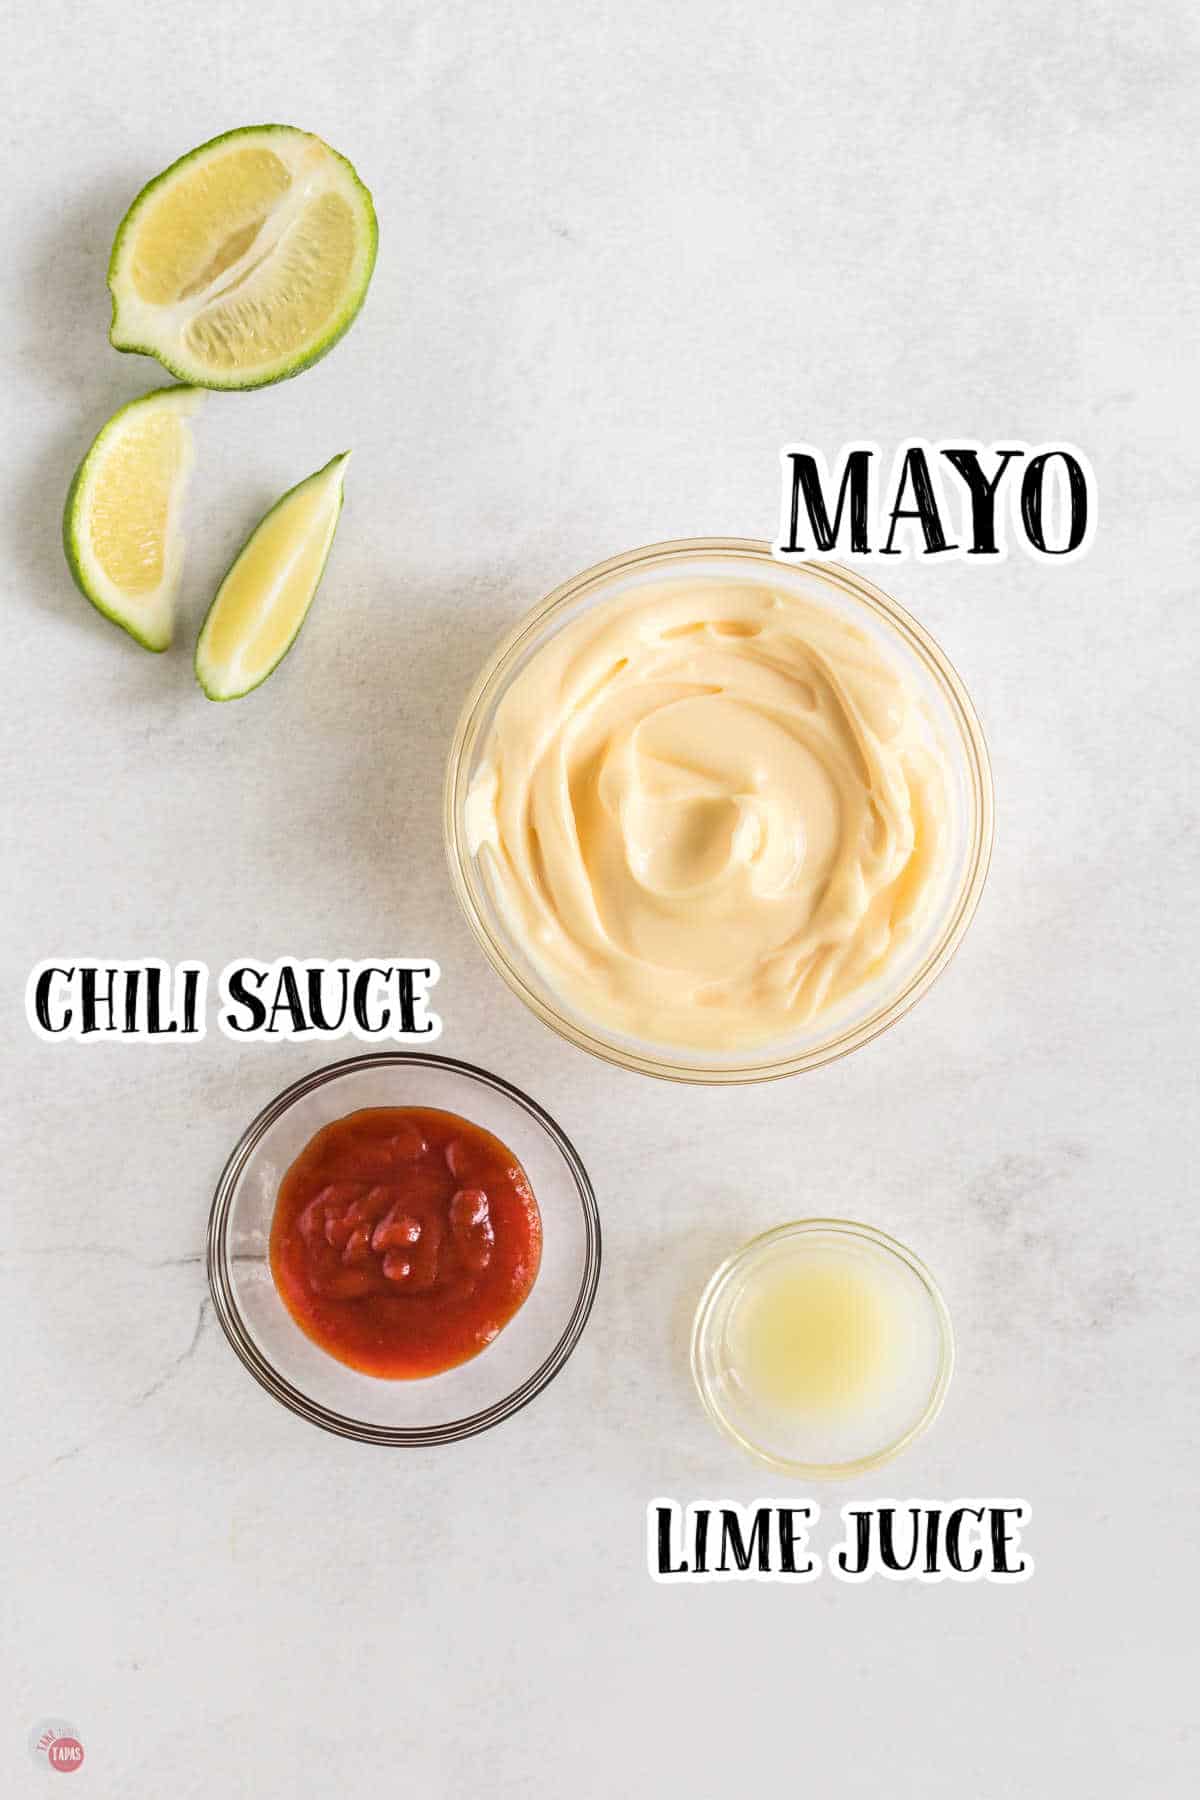 Small bowls on a worktop filled with mayo, chili sauce and lime juice with text labels next to them.